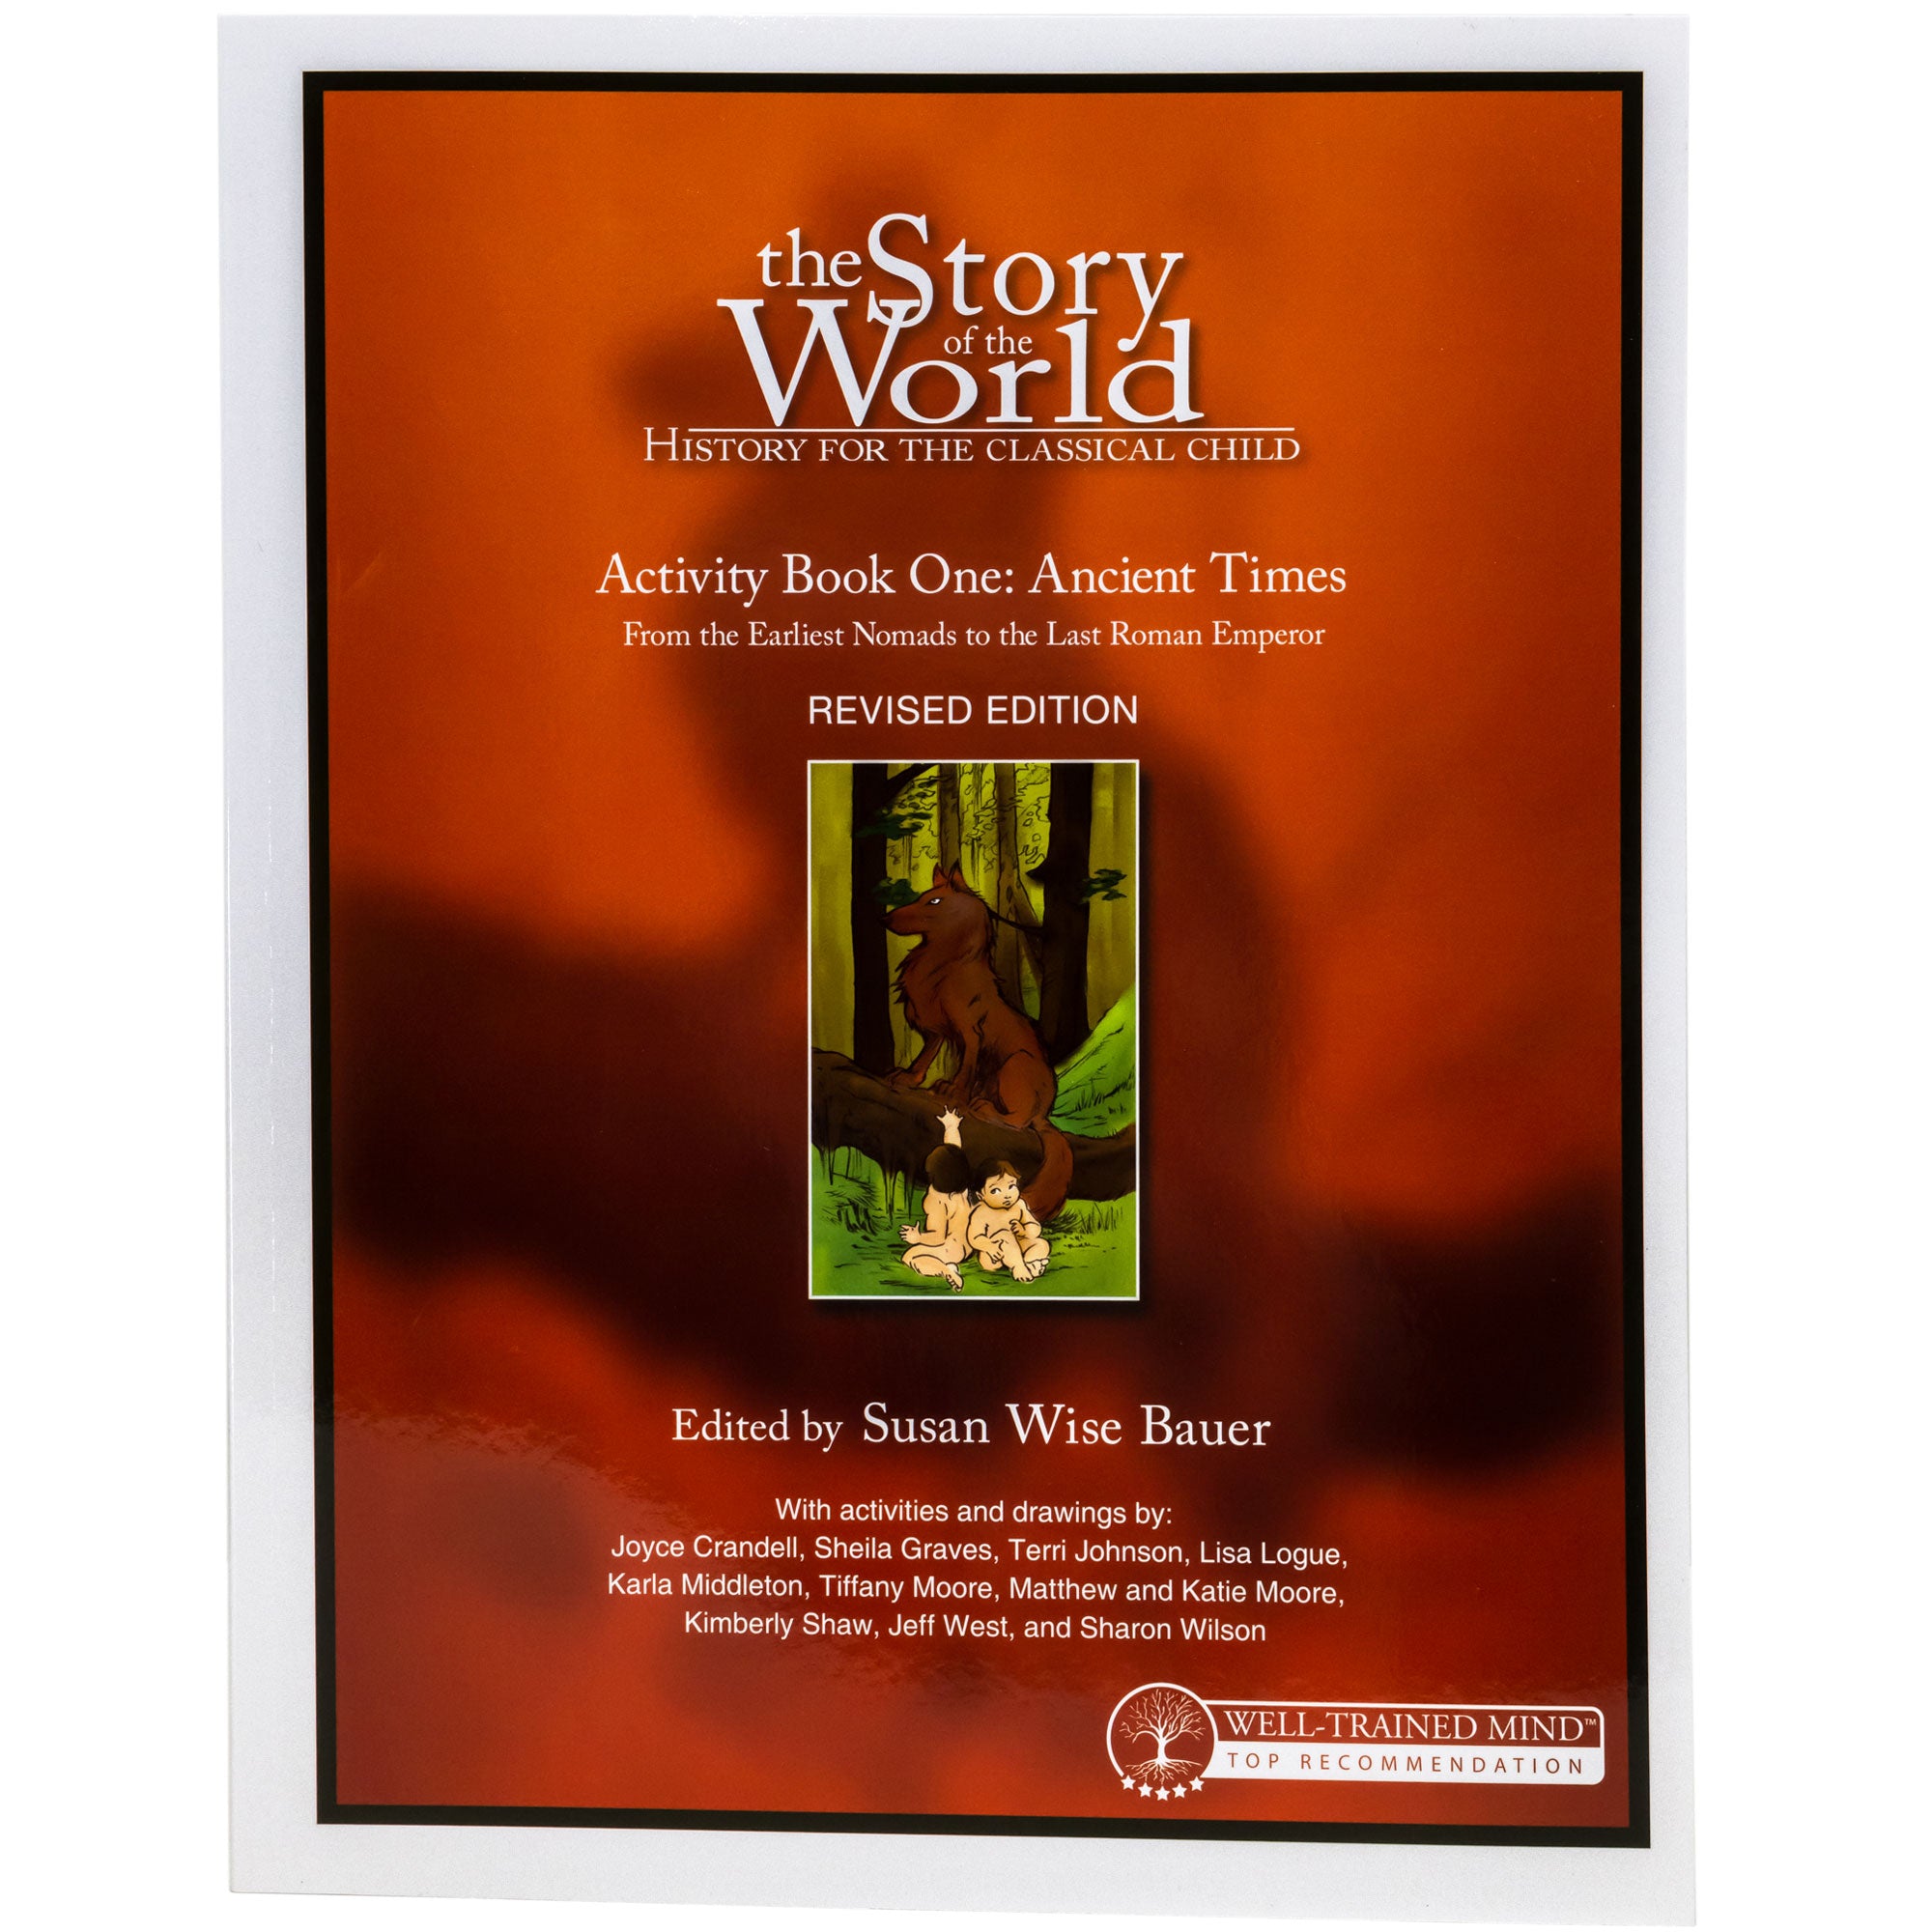 The Story of the World 1 Activity book cover. The cover is mainly orange with a black bottom and a small illustration in the middle of a wolf in the woods, with 2 naked babies. One of the babies is turned around toward the wolf and reaching his hand up to the wolf. The white text reads “The Story of the World. History for the classical child. Activity Book 1, Ancient Times. From the earliest nomads to the last roman emperor. Revised edition. Edited by Susan Wise Bauer.”